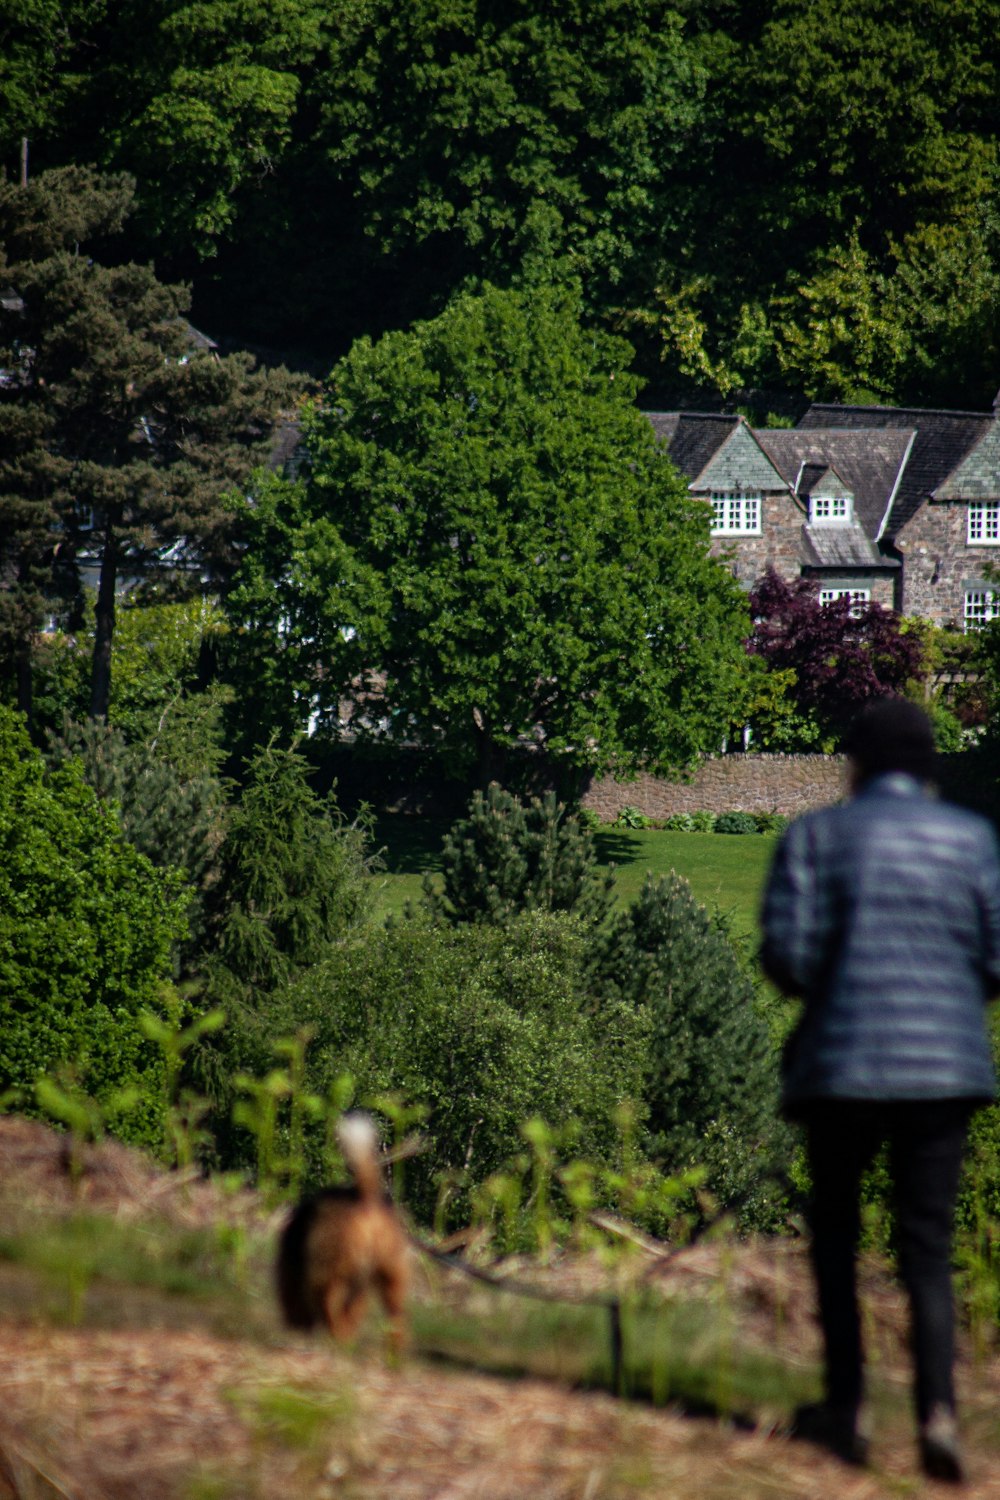 a person walking a dog on a path in front of a house